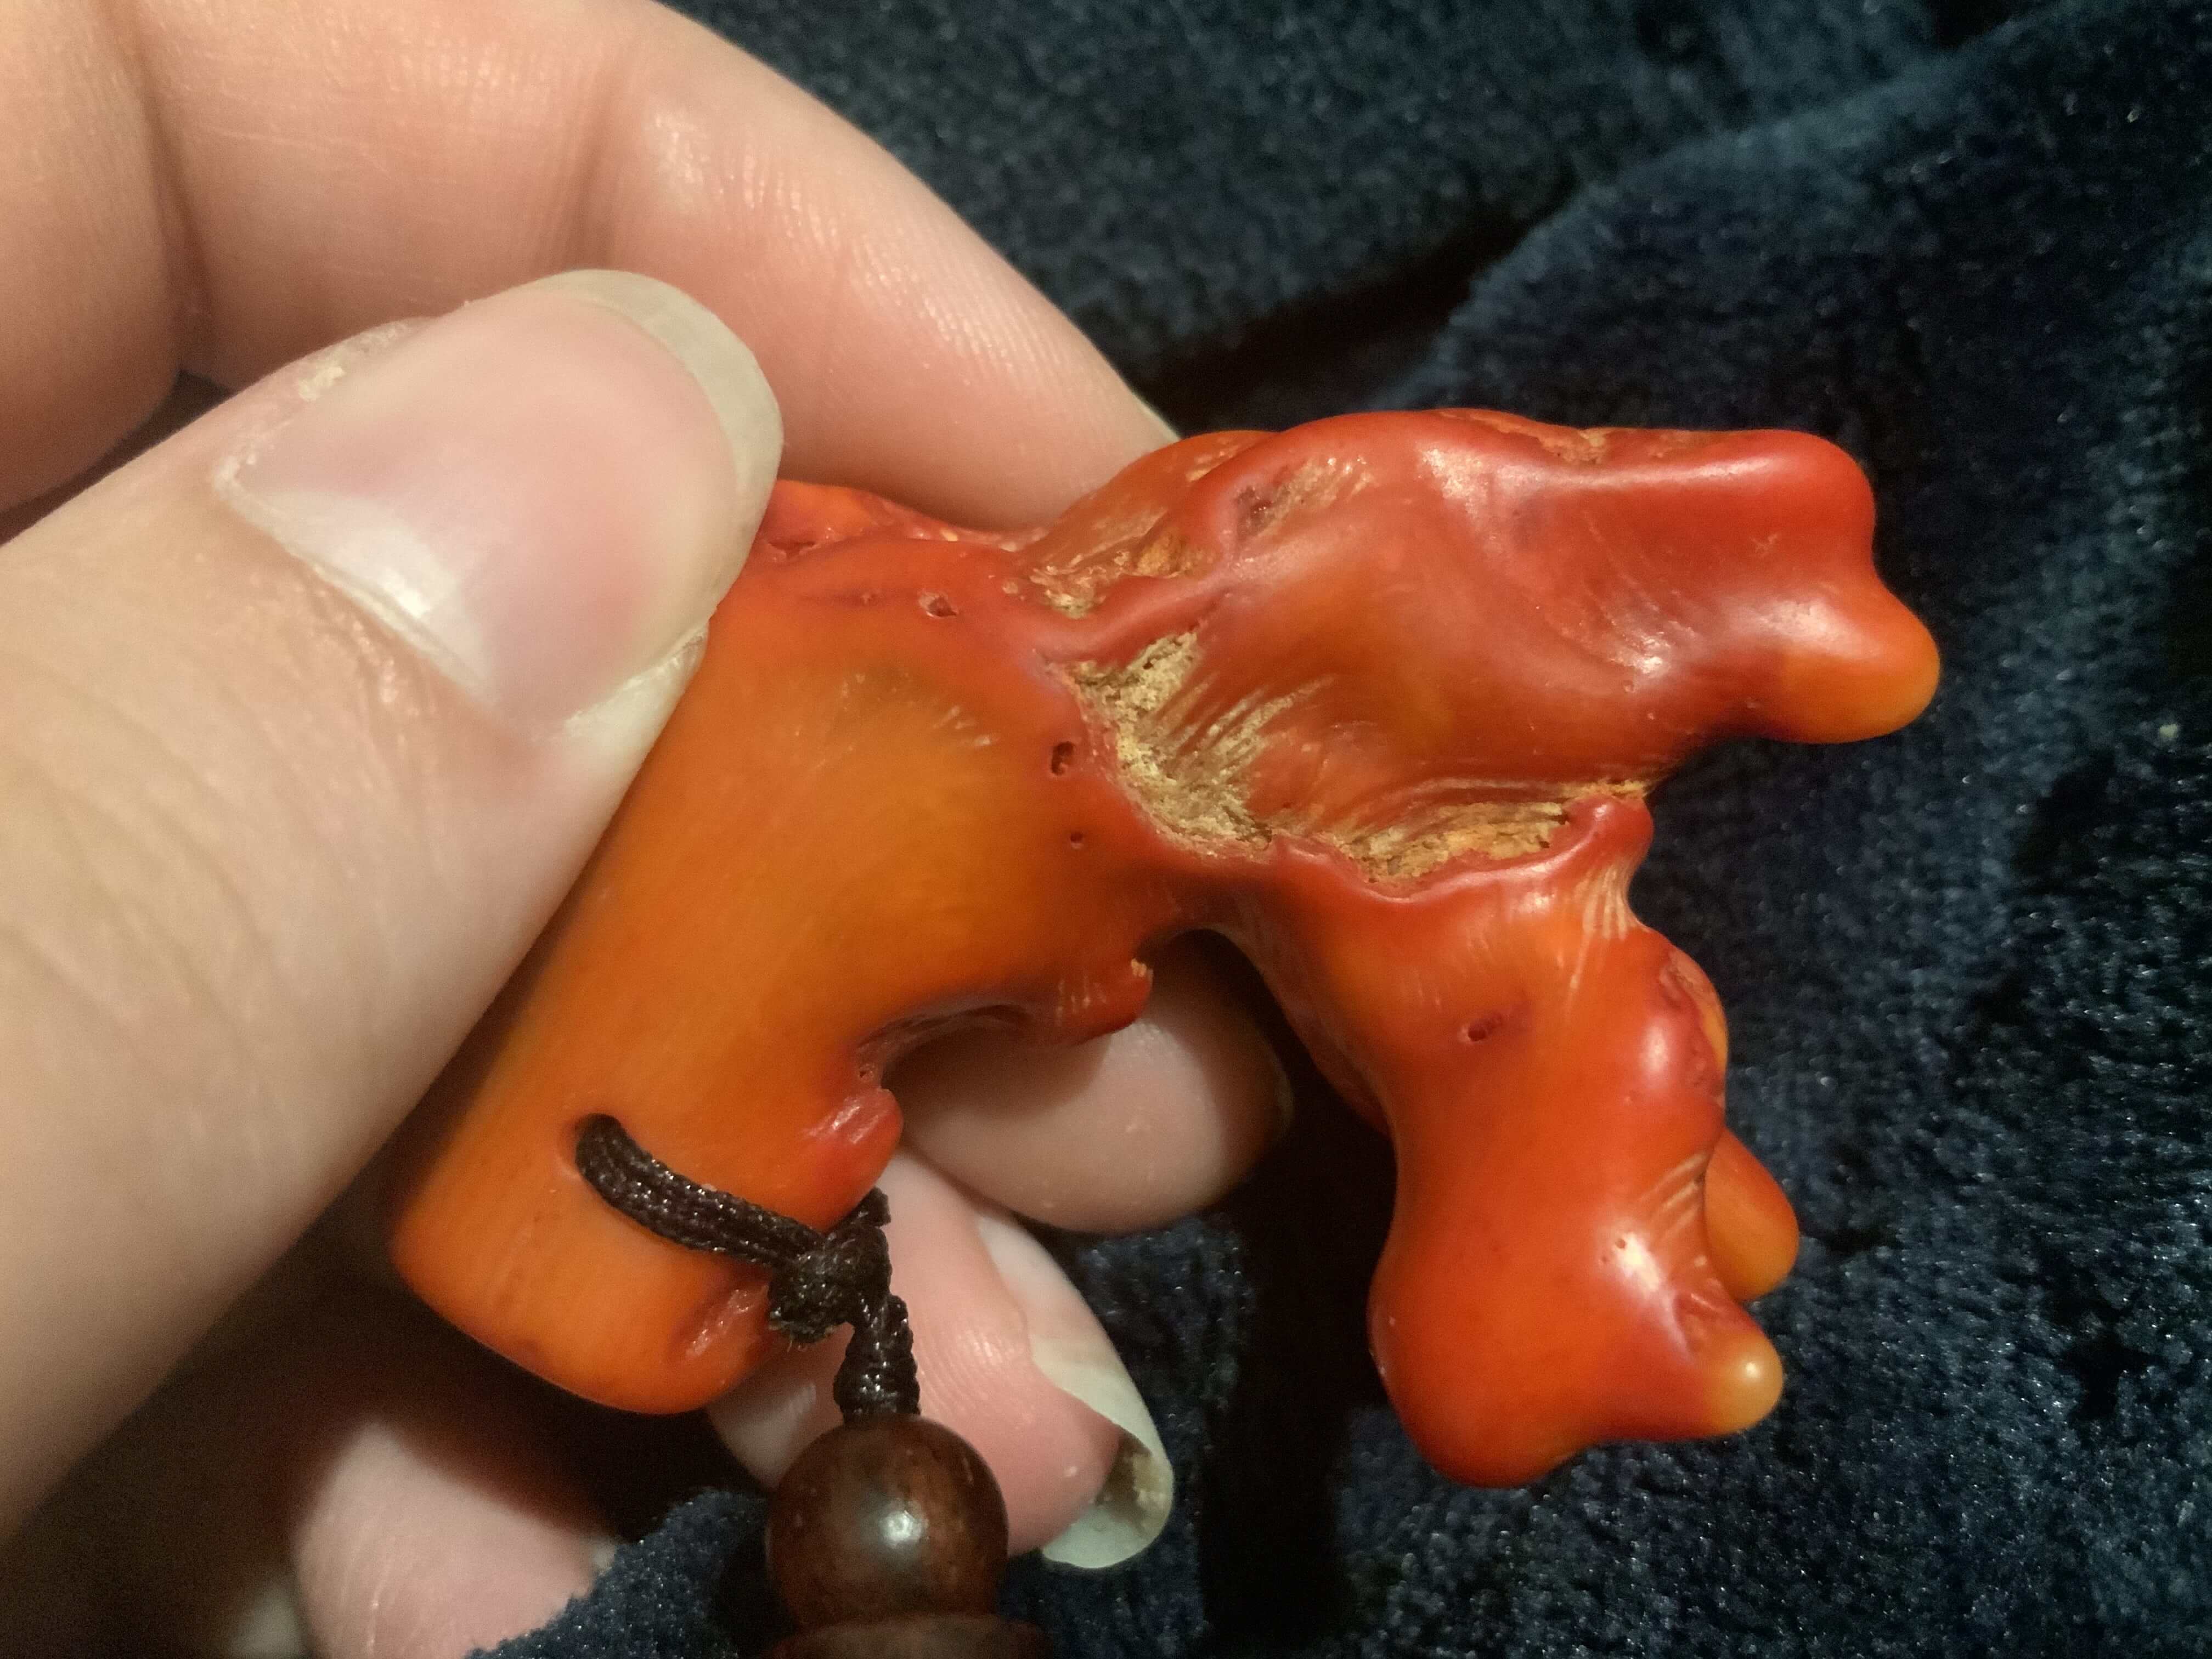 Is this real or dyed red coral?